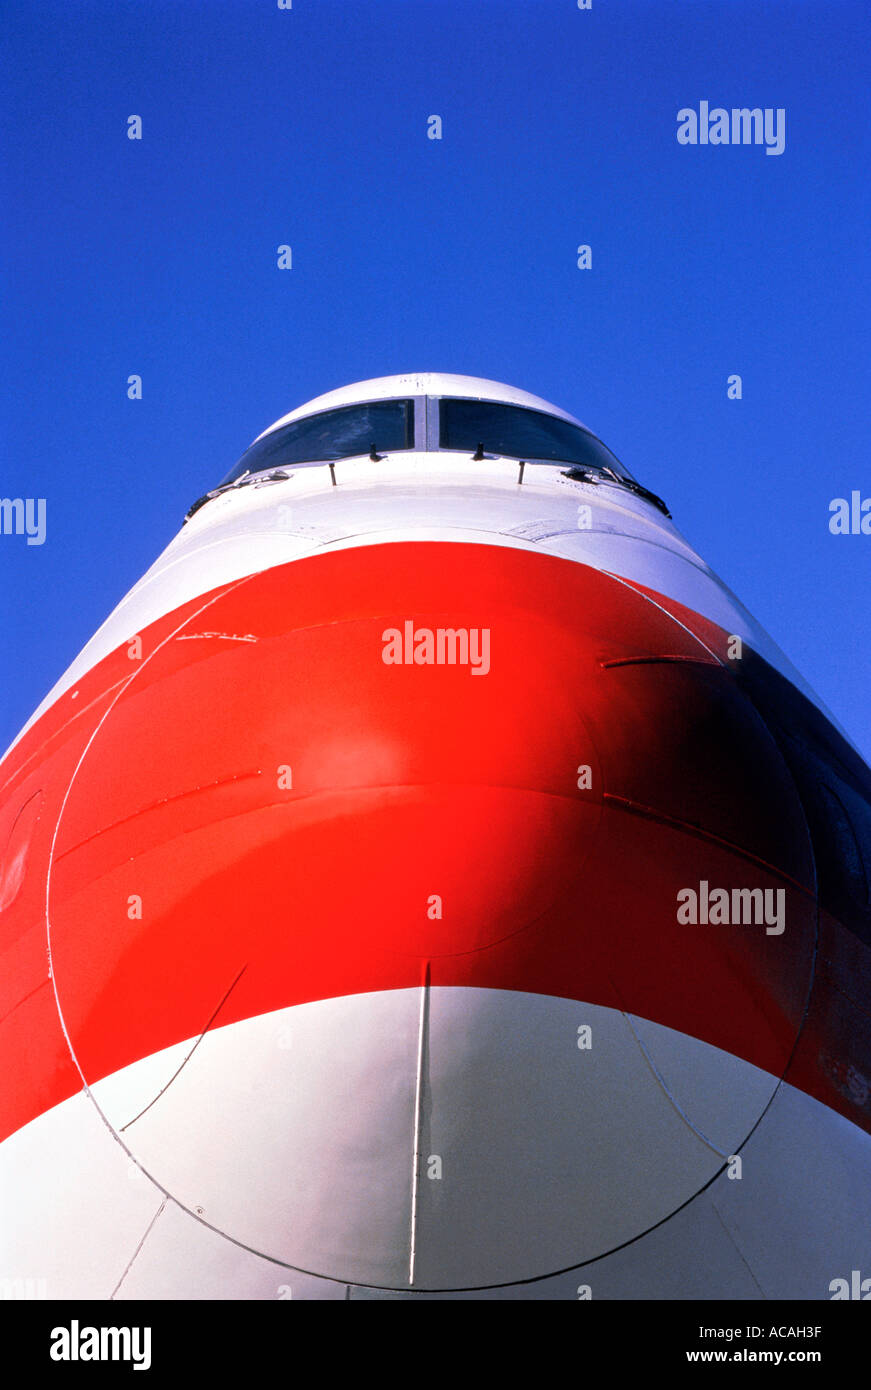 Boeing 747 jumbo jet nose red and white daylight with blue sky Stock Photo